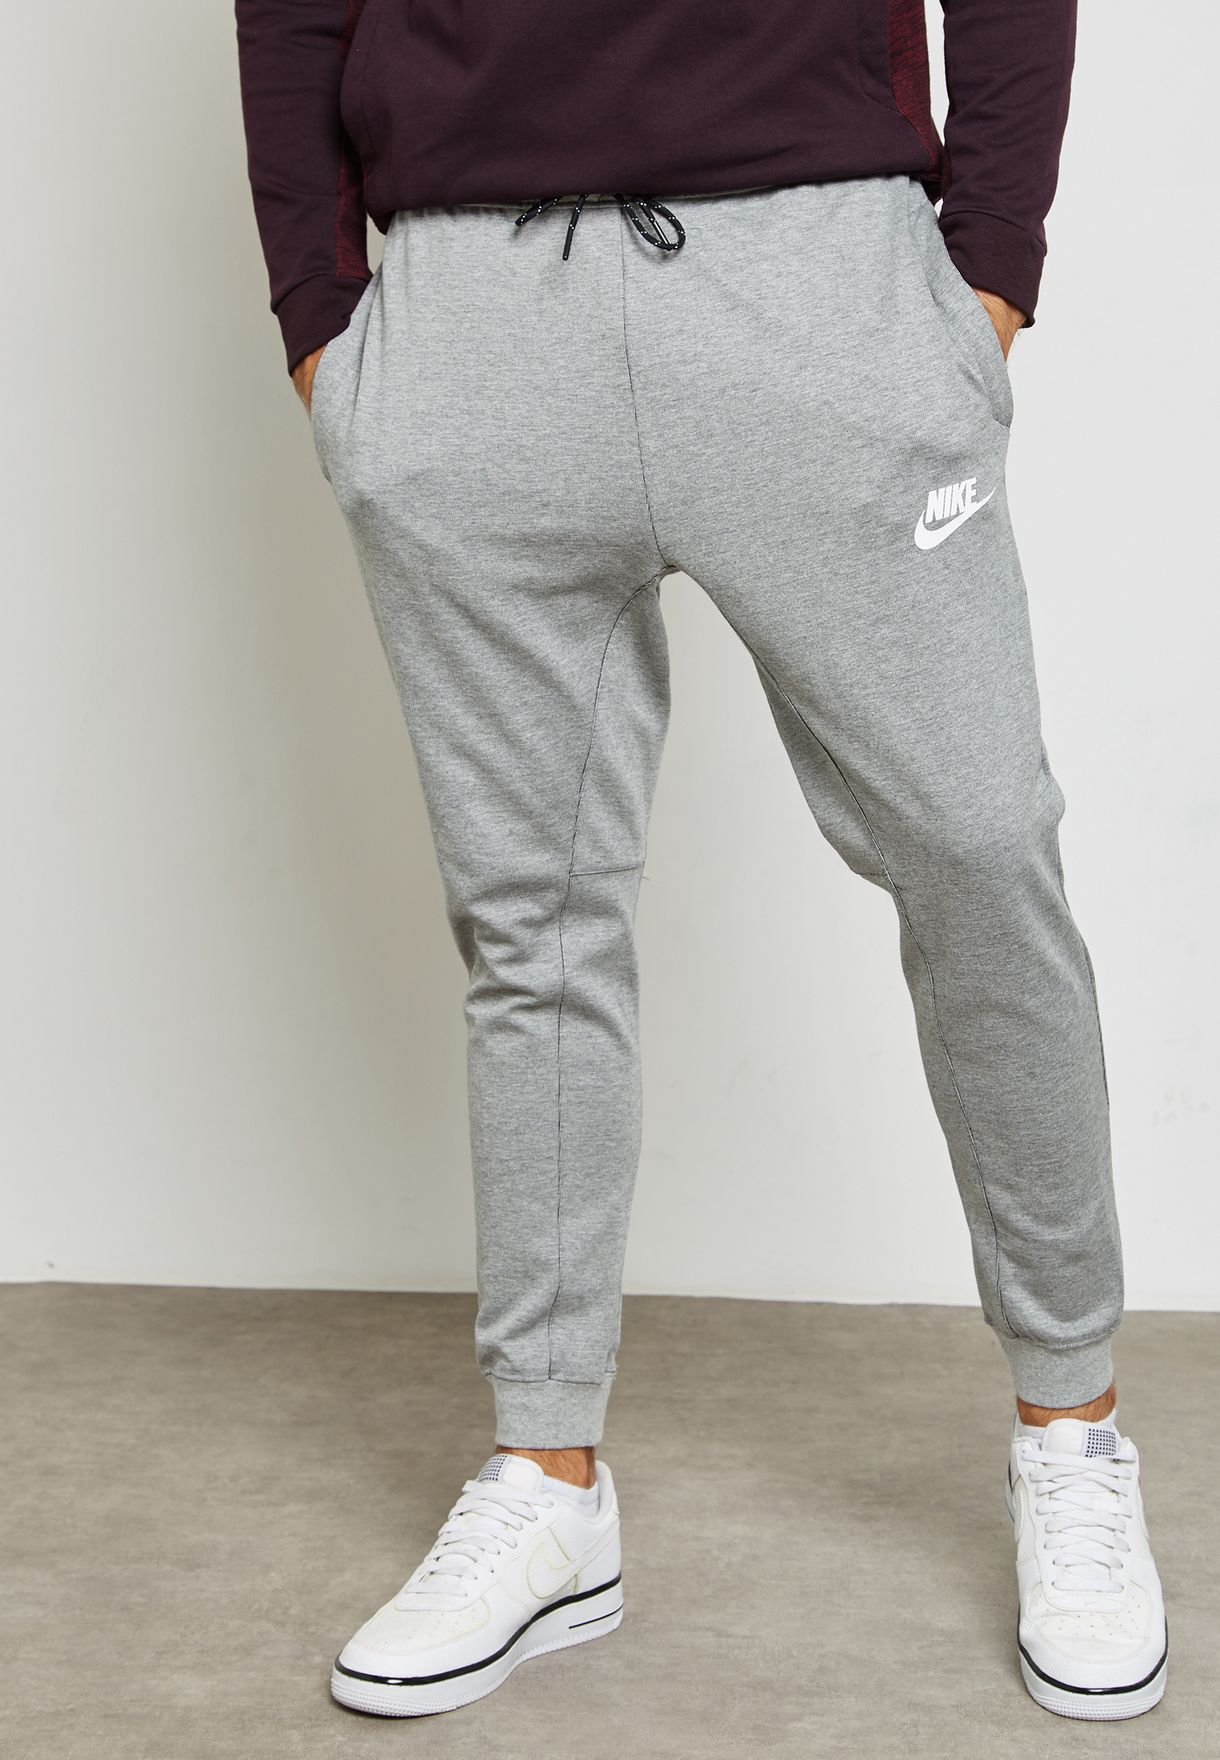 mens nike sweat outfits